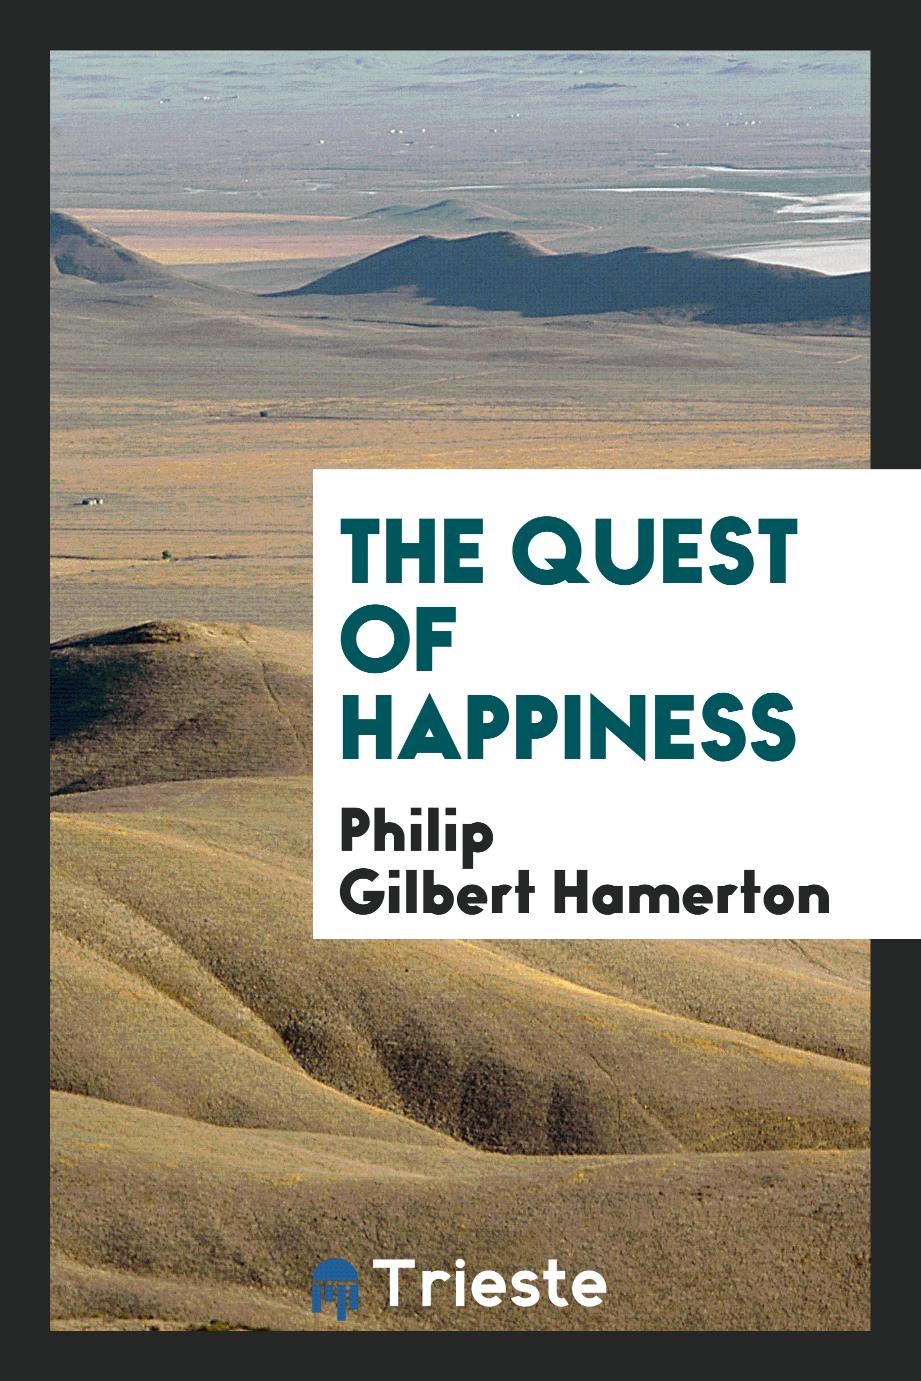 The quest of happiness